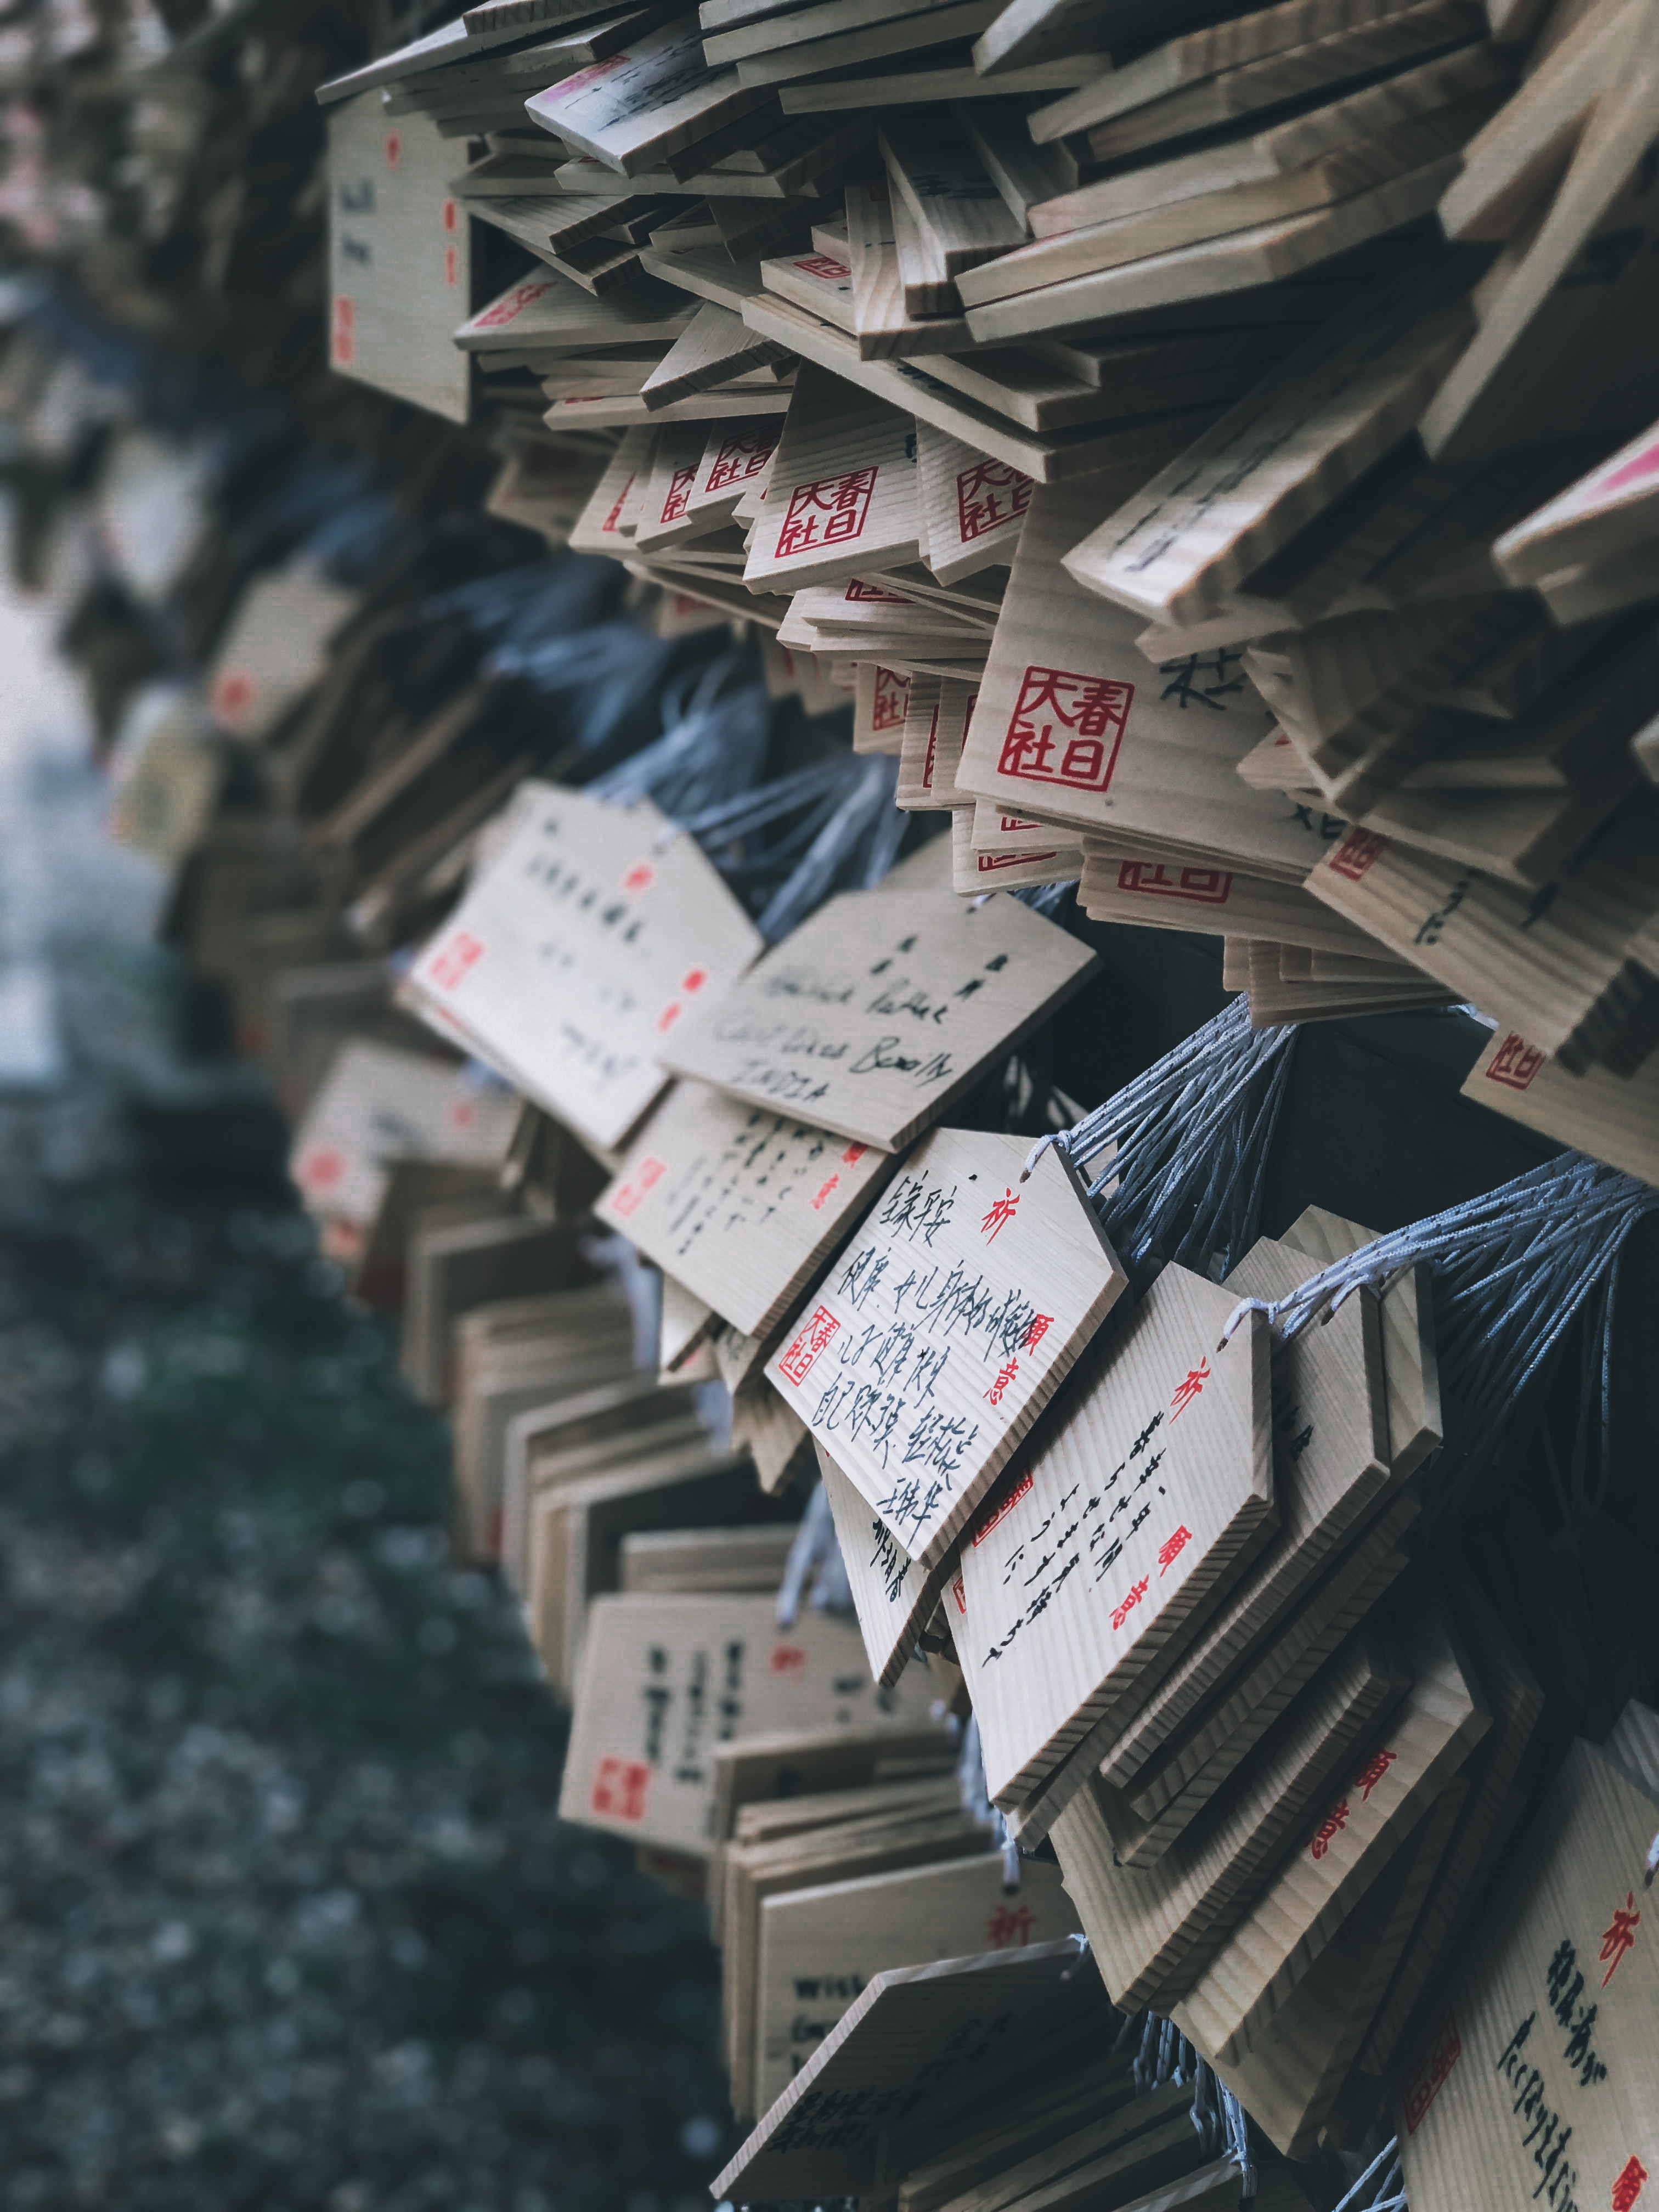 Image of prayer boards at a shrine Kyoto, Japan to illustrate the idea of tags